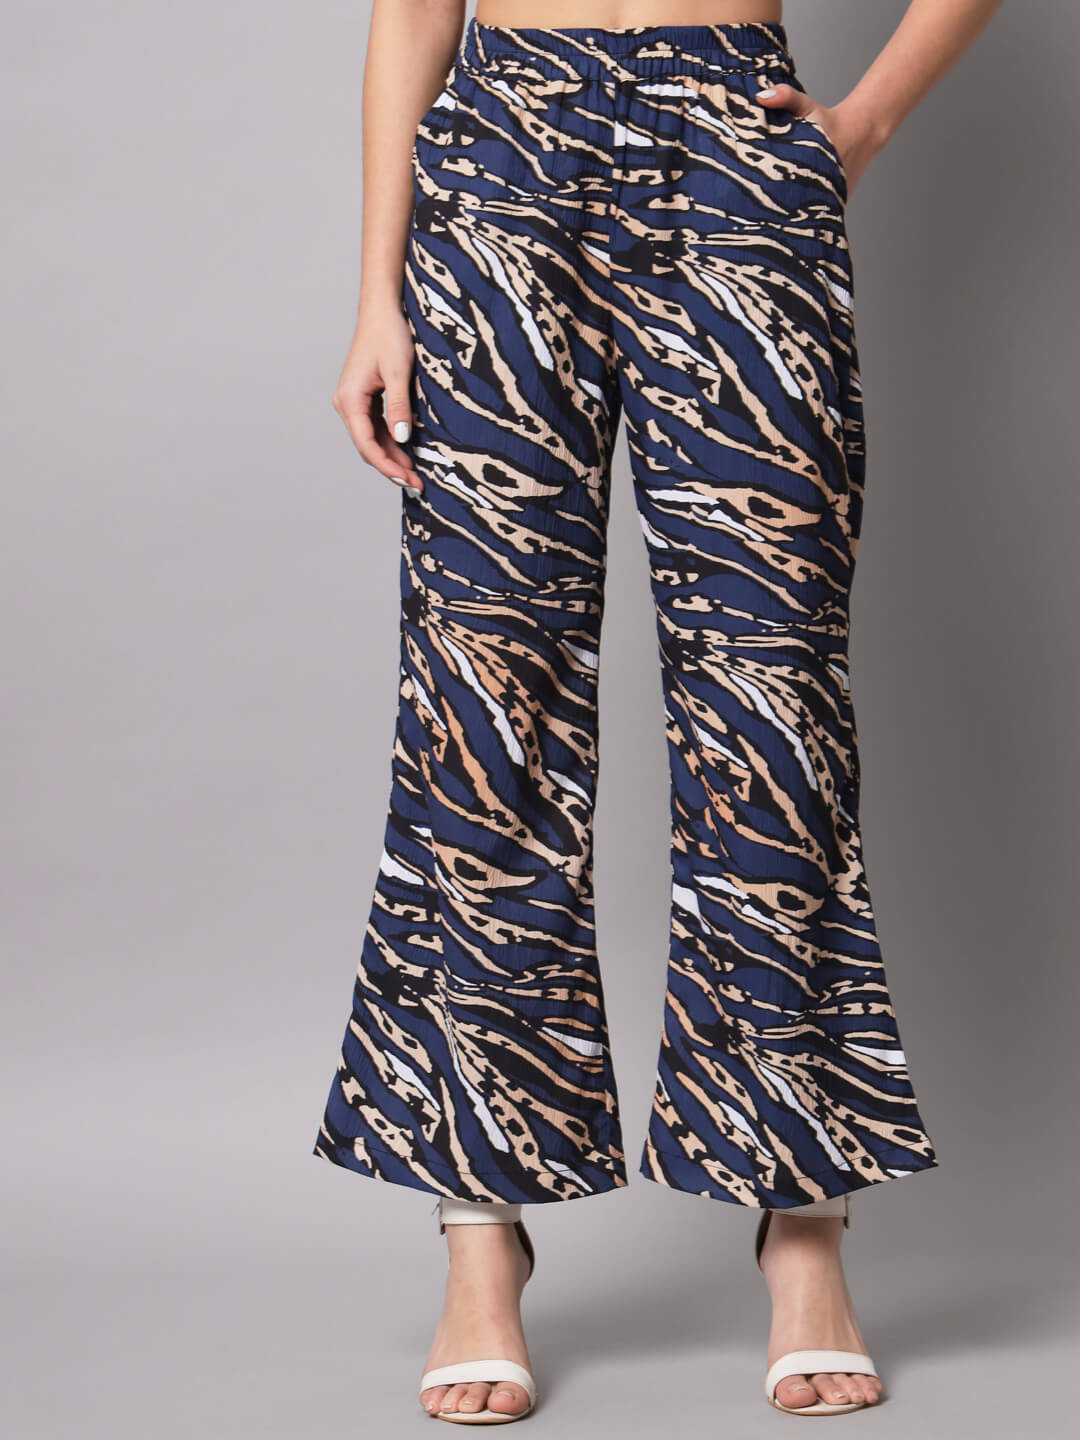 Printed Casual Abstract Co-Ord Set